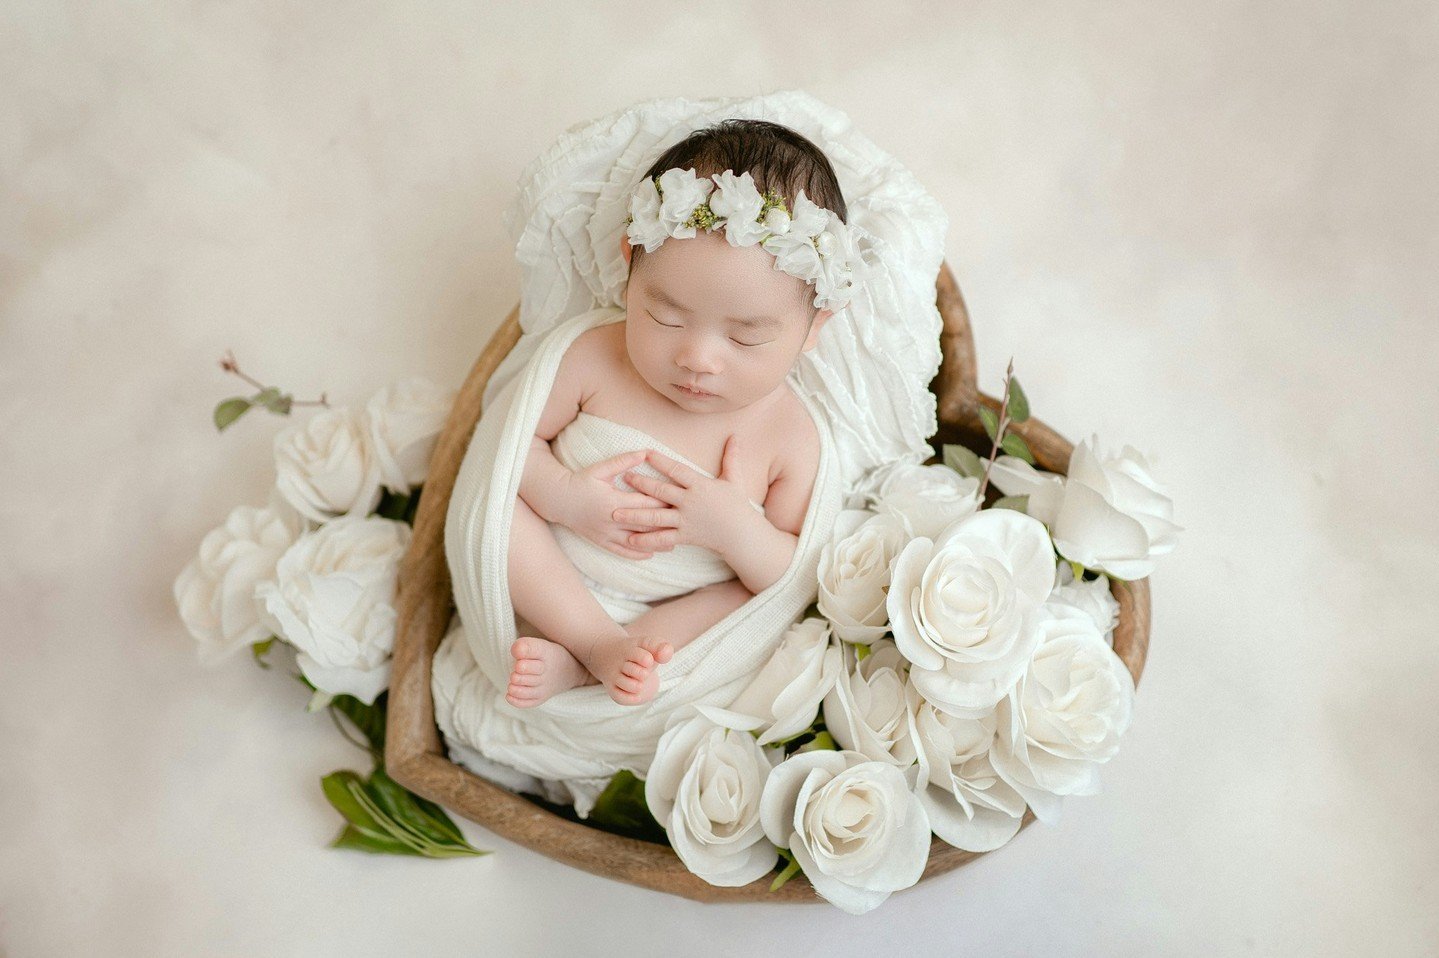 The heart bowl, florals, whites, my fave!

*Book your newborn session 1-2 months in advance to ensure availability.
*We use your due date to hold your spot, once baby arrives we&rsquo;ll get you scheduled!
*Only 8 newborns accepted every month.
Https